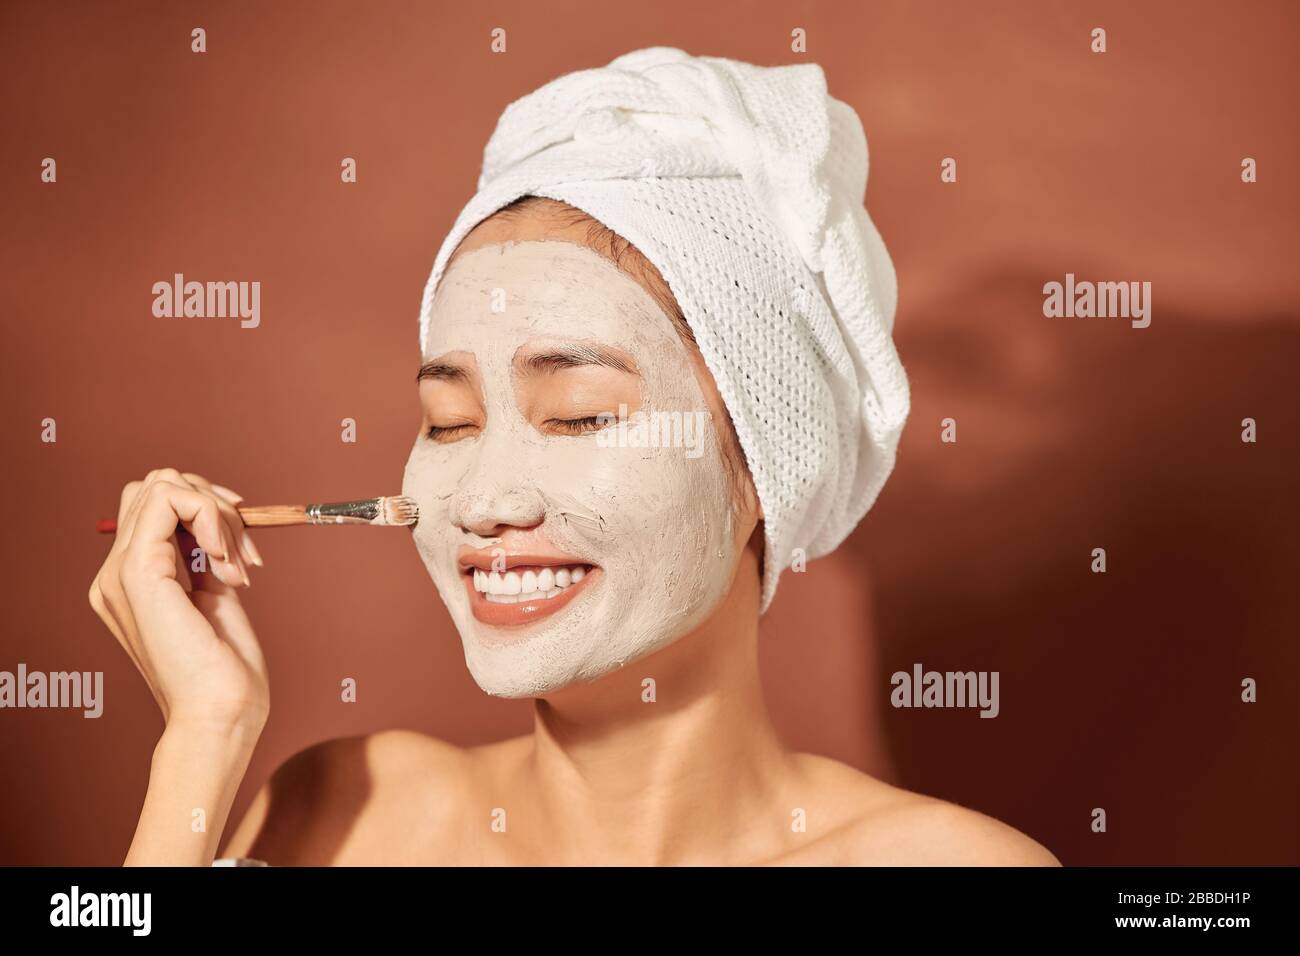 Close-up Portrait of beautiful Asian girl in spa with a towel on her head applying facial clay mask. Stock Photo